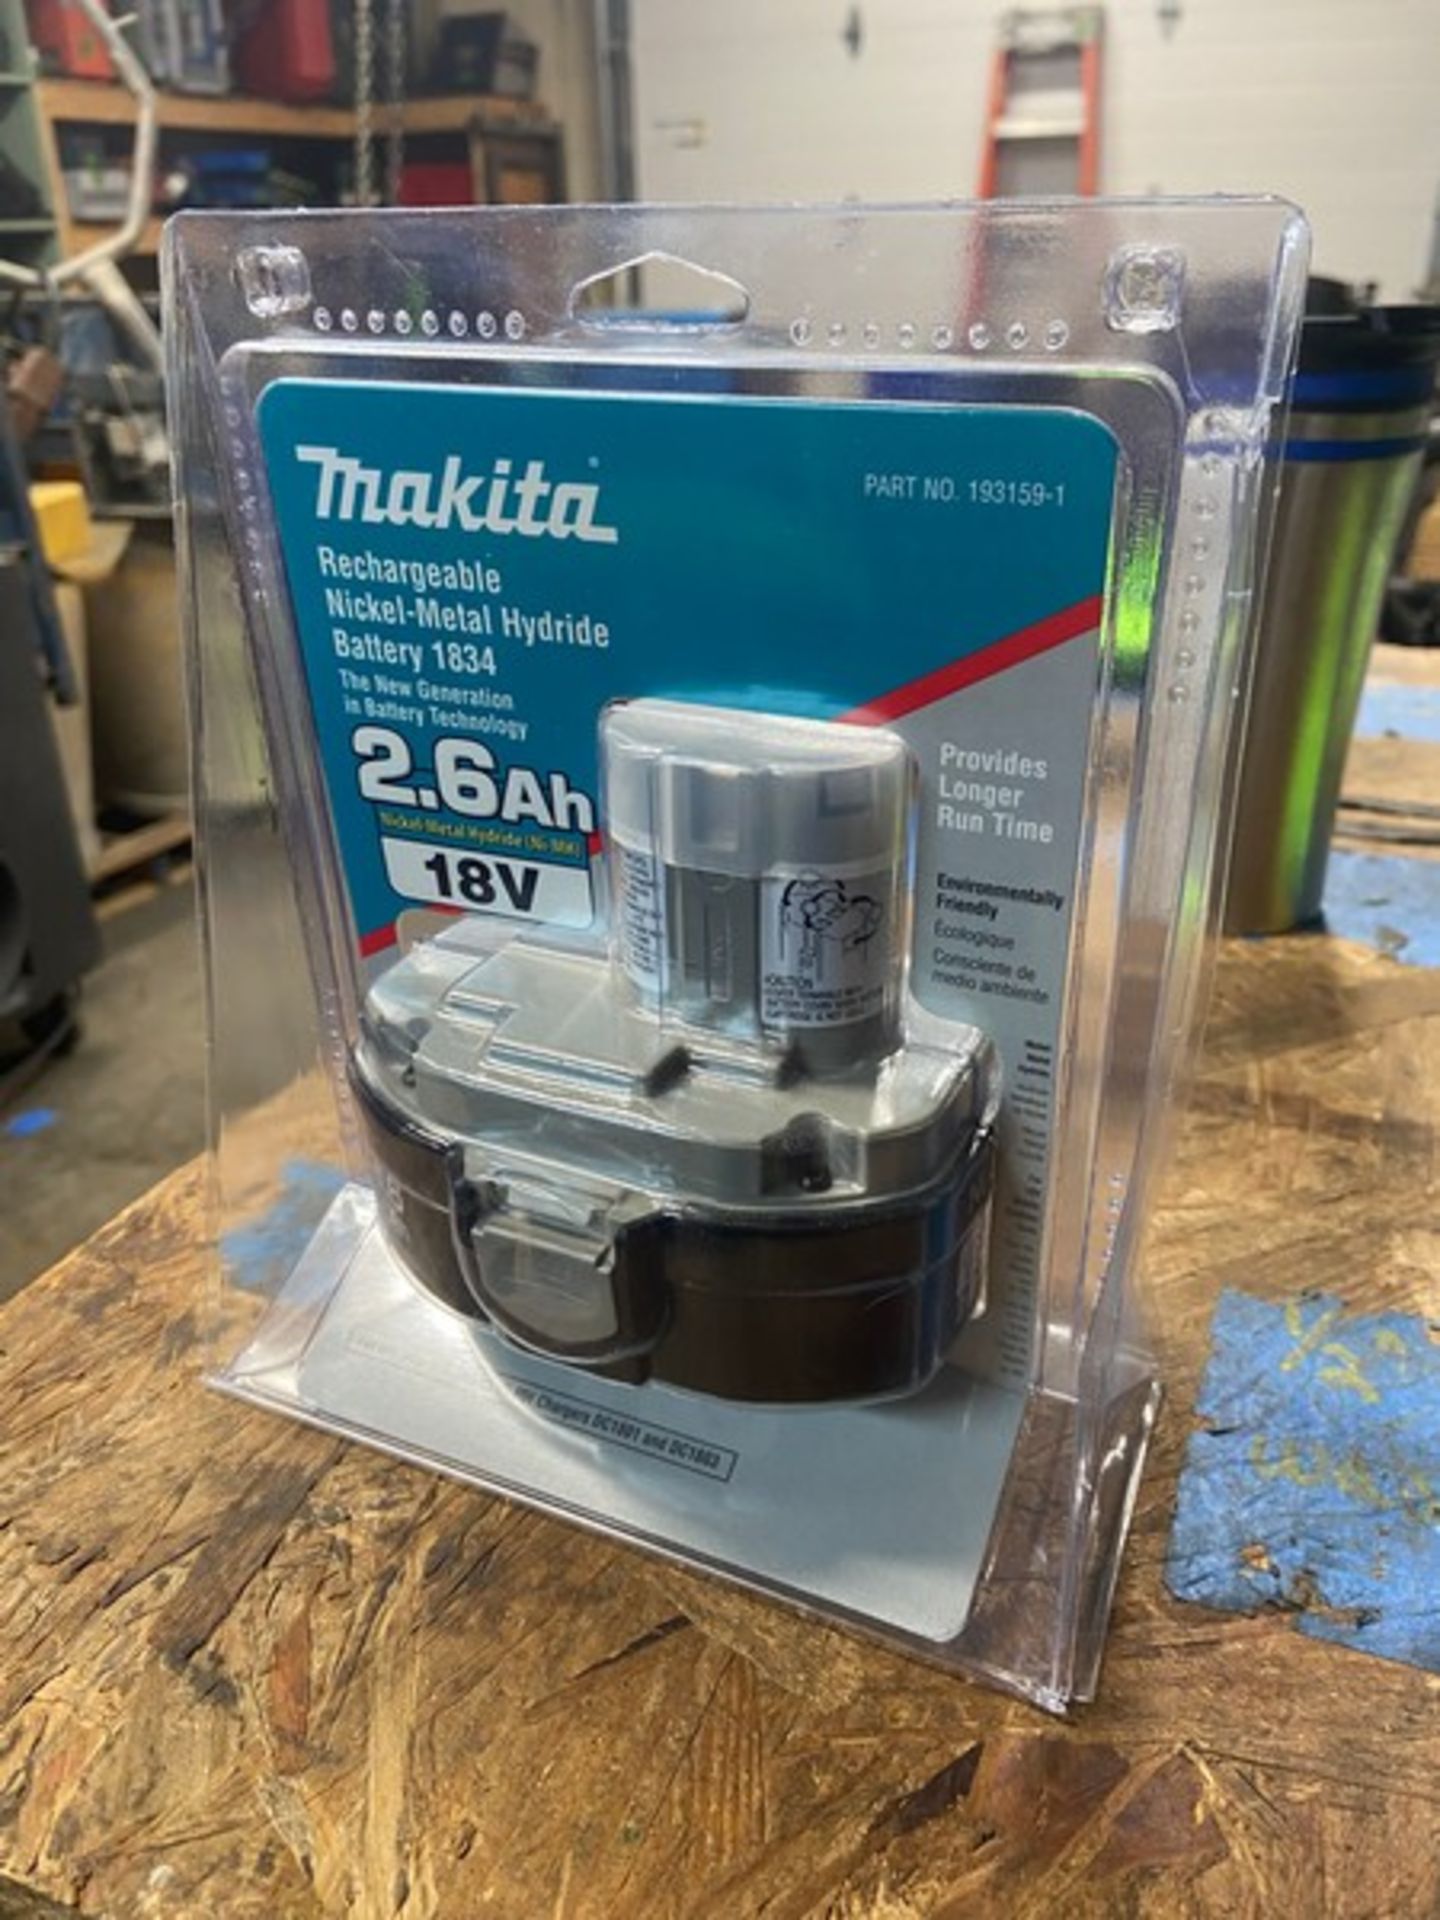 NEW Makita Regardeable Nickel-Metal Hydride Battery 1834, 18 Volts (LOCATED IN MONROEVILLE, PA) - Image 2 of 6